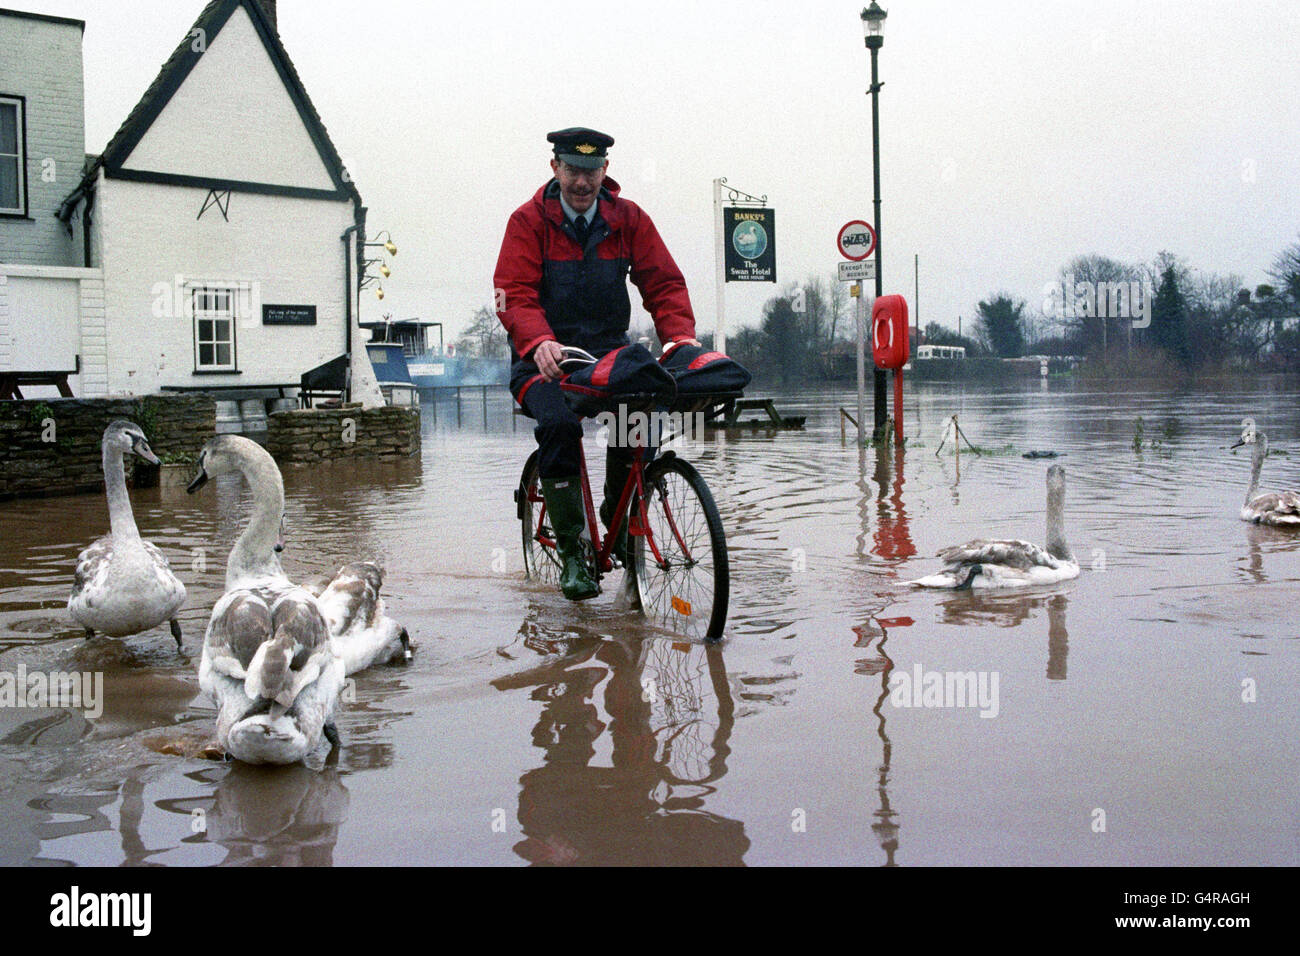 Postman Ray Loveslife-Brown pedals away after delivering to the Swan Hotel at Upton upon Severn. After bursting its banks, water from the nearby river Severn has threatened the hotel for nearly two weeks, forcing closure during the Christmas Period Stock Photo